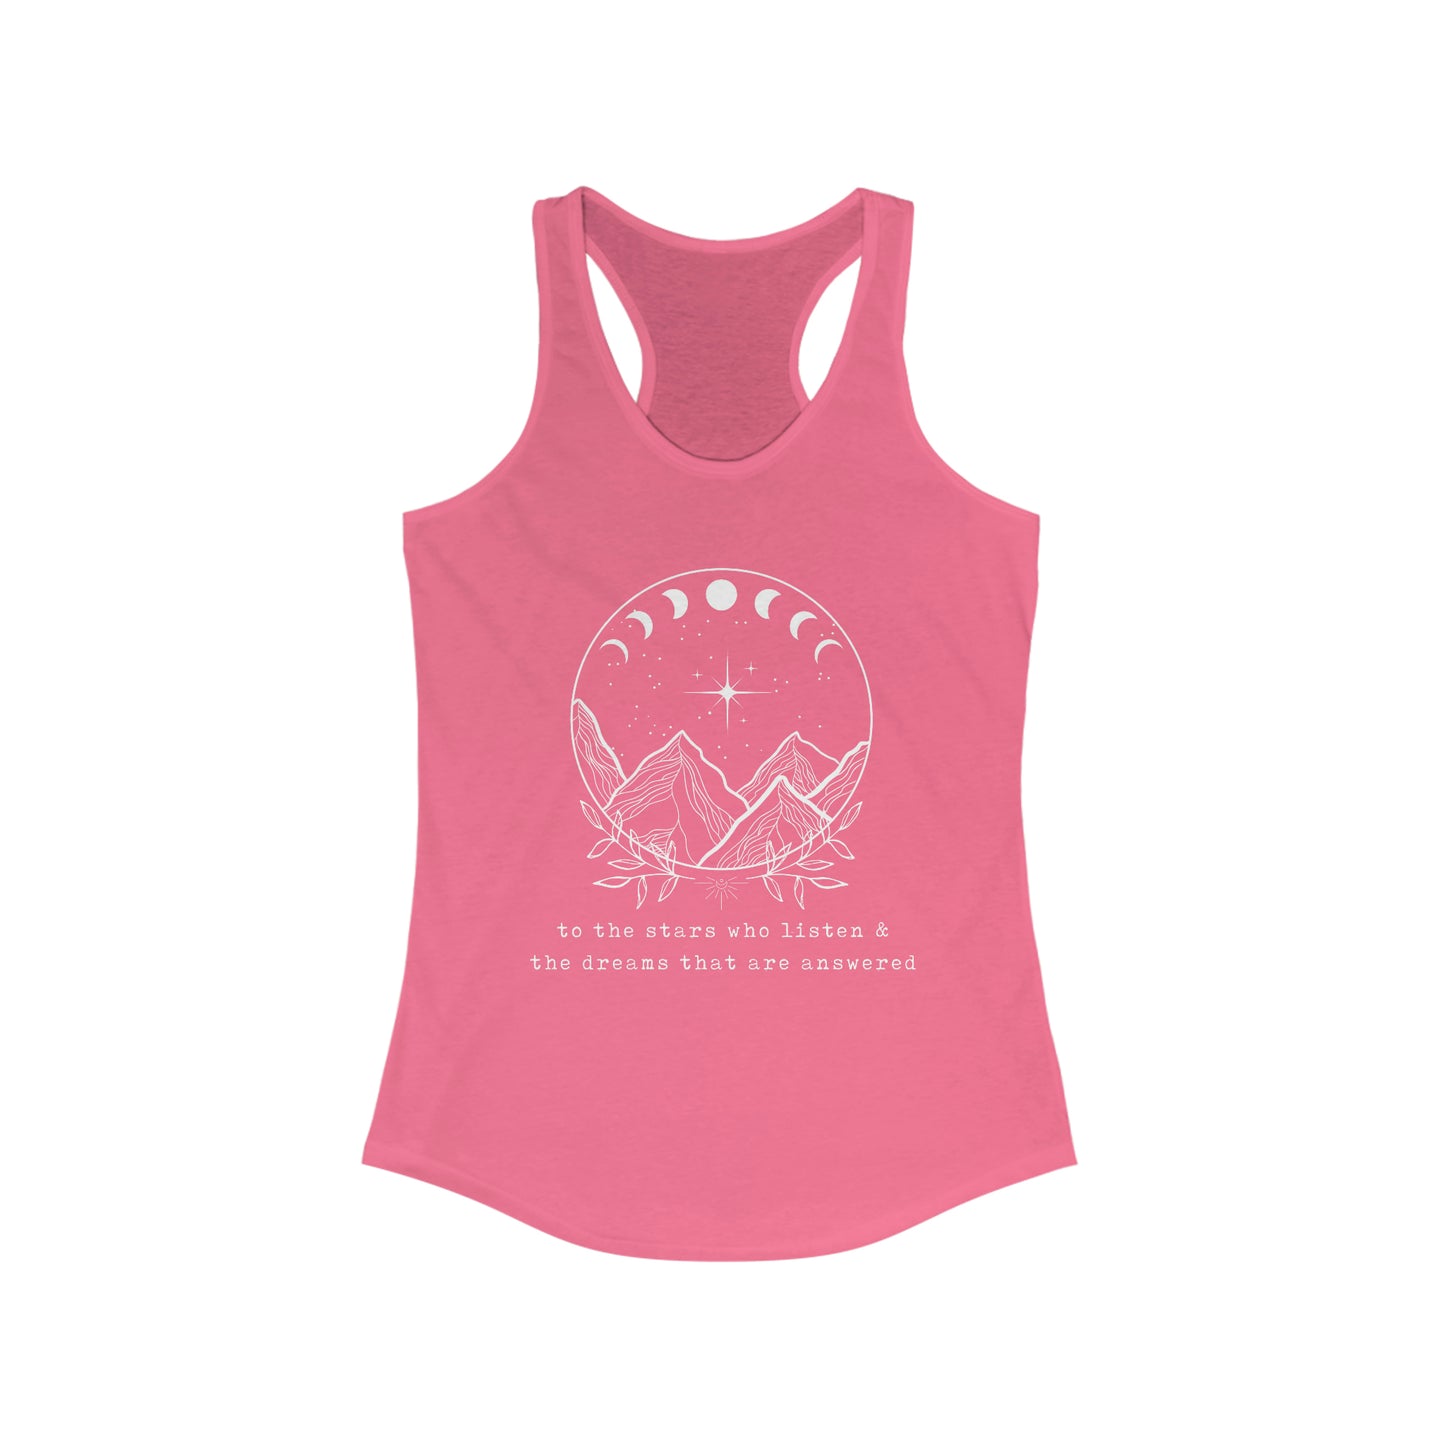 For the Dreamers Racerback Tank